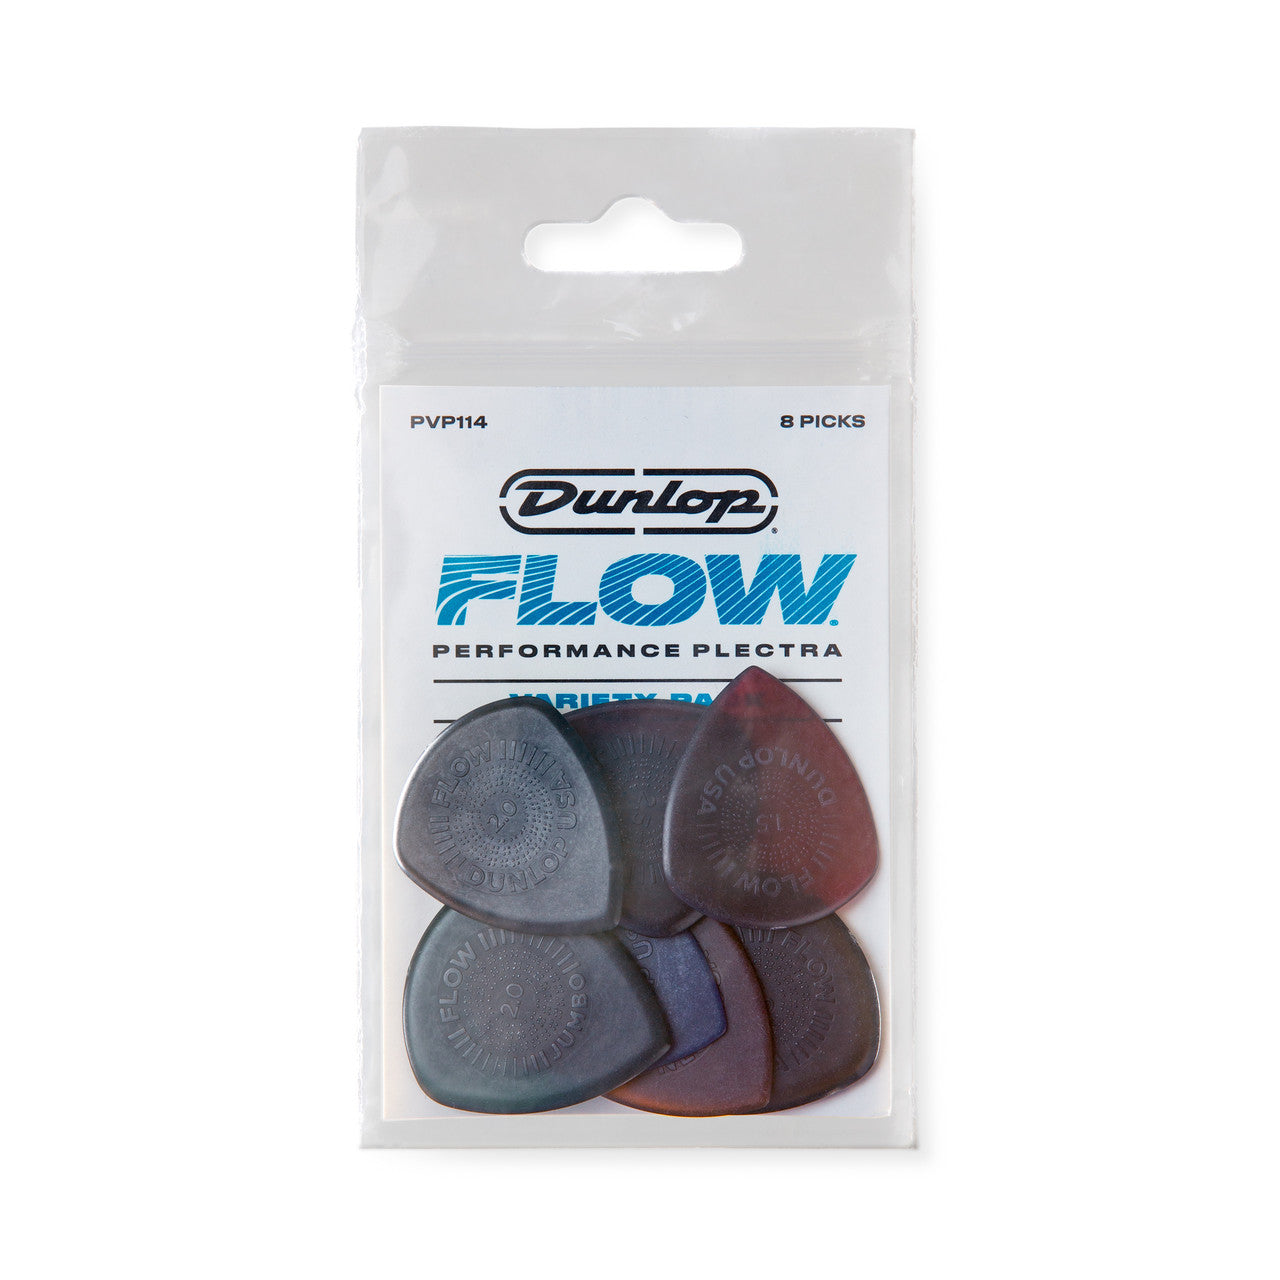 Dunlop PVP114 Flow Variety 8 Pack